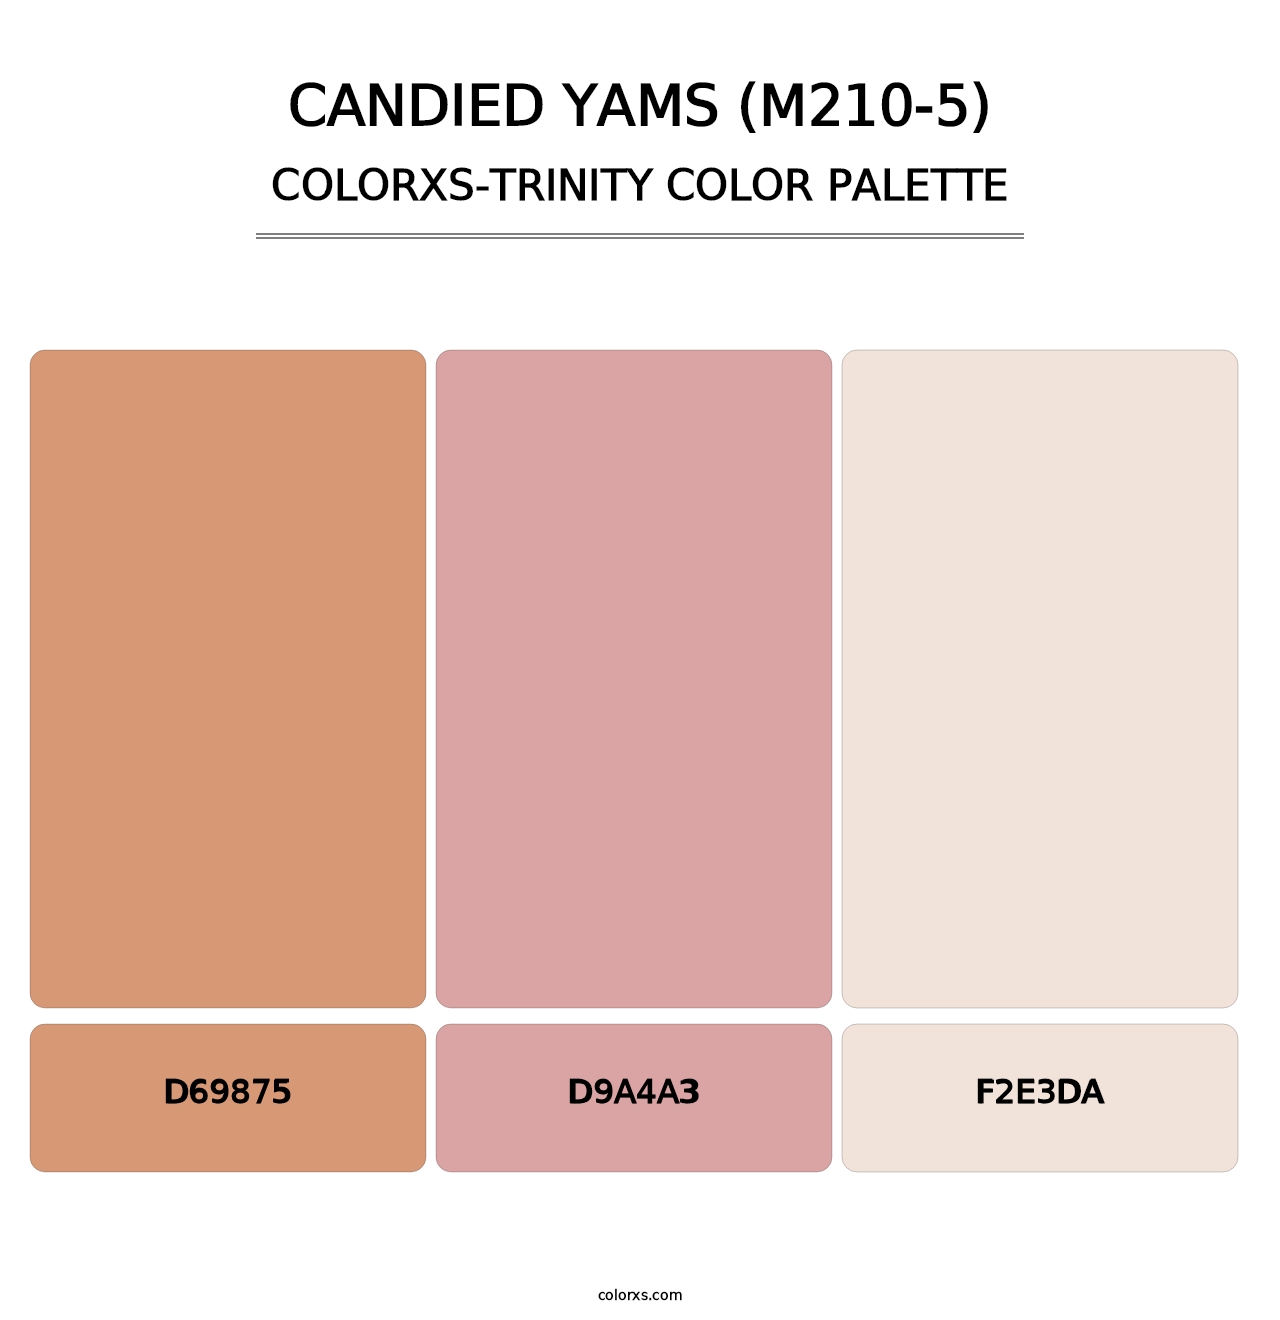 Candied Yams (M210-5) - Colorxs Trinity Palette